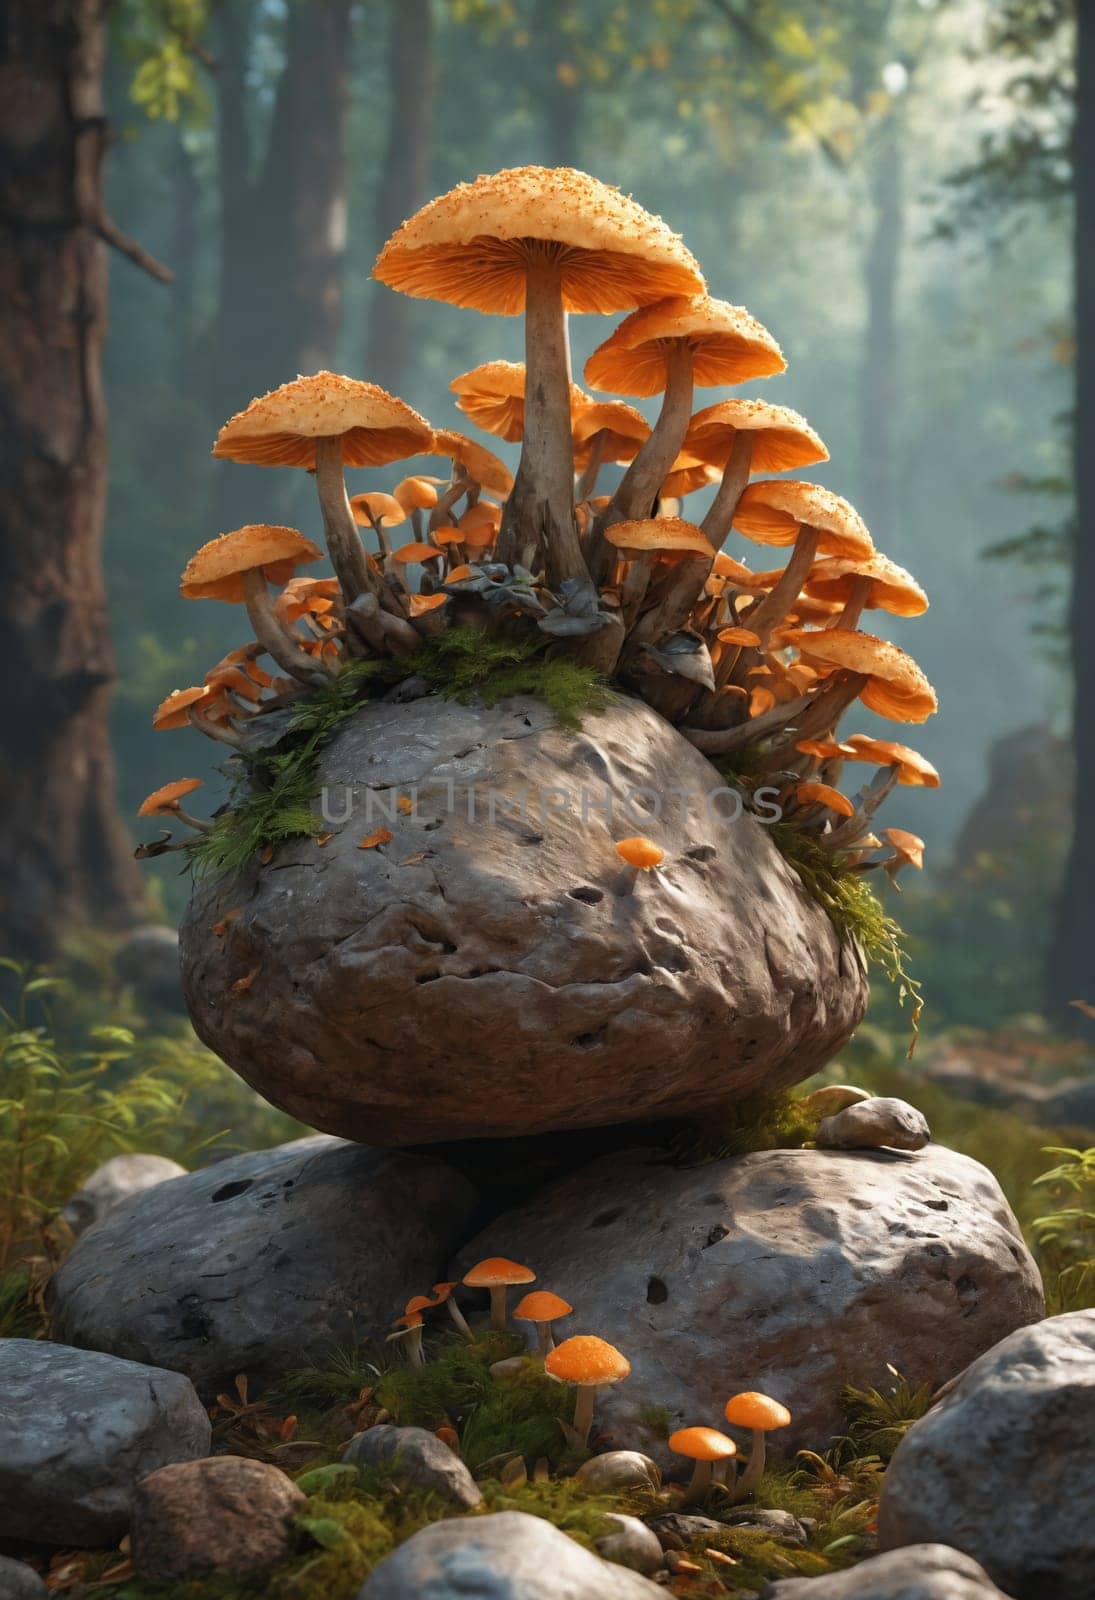 A diverse plant community thrives on a rock, with mushrooms serving as groundcover. This natural landscape showcases the adaptation of terrestrial plants in an artistic way